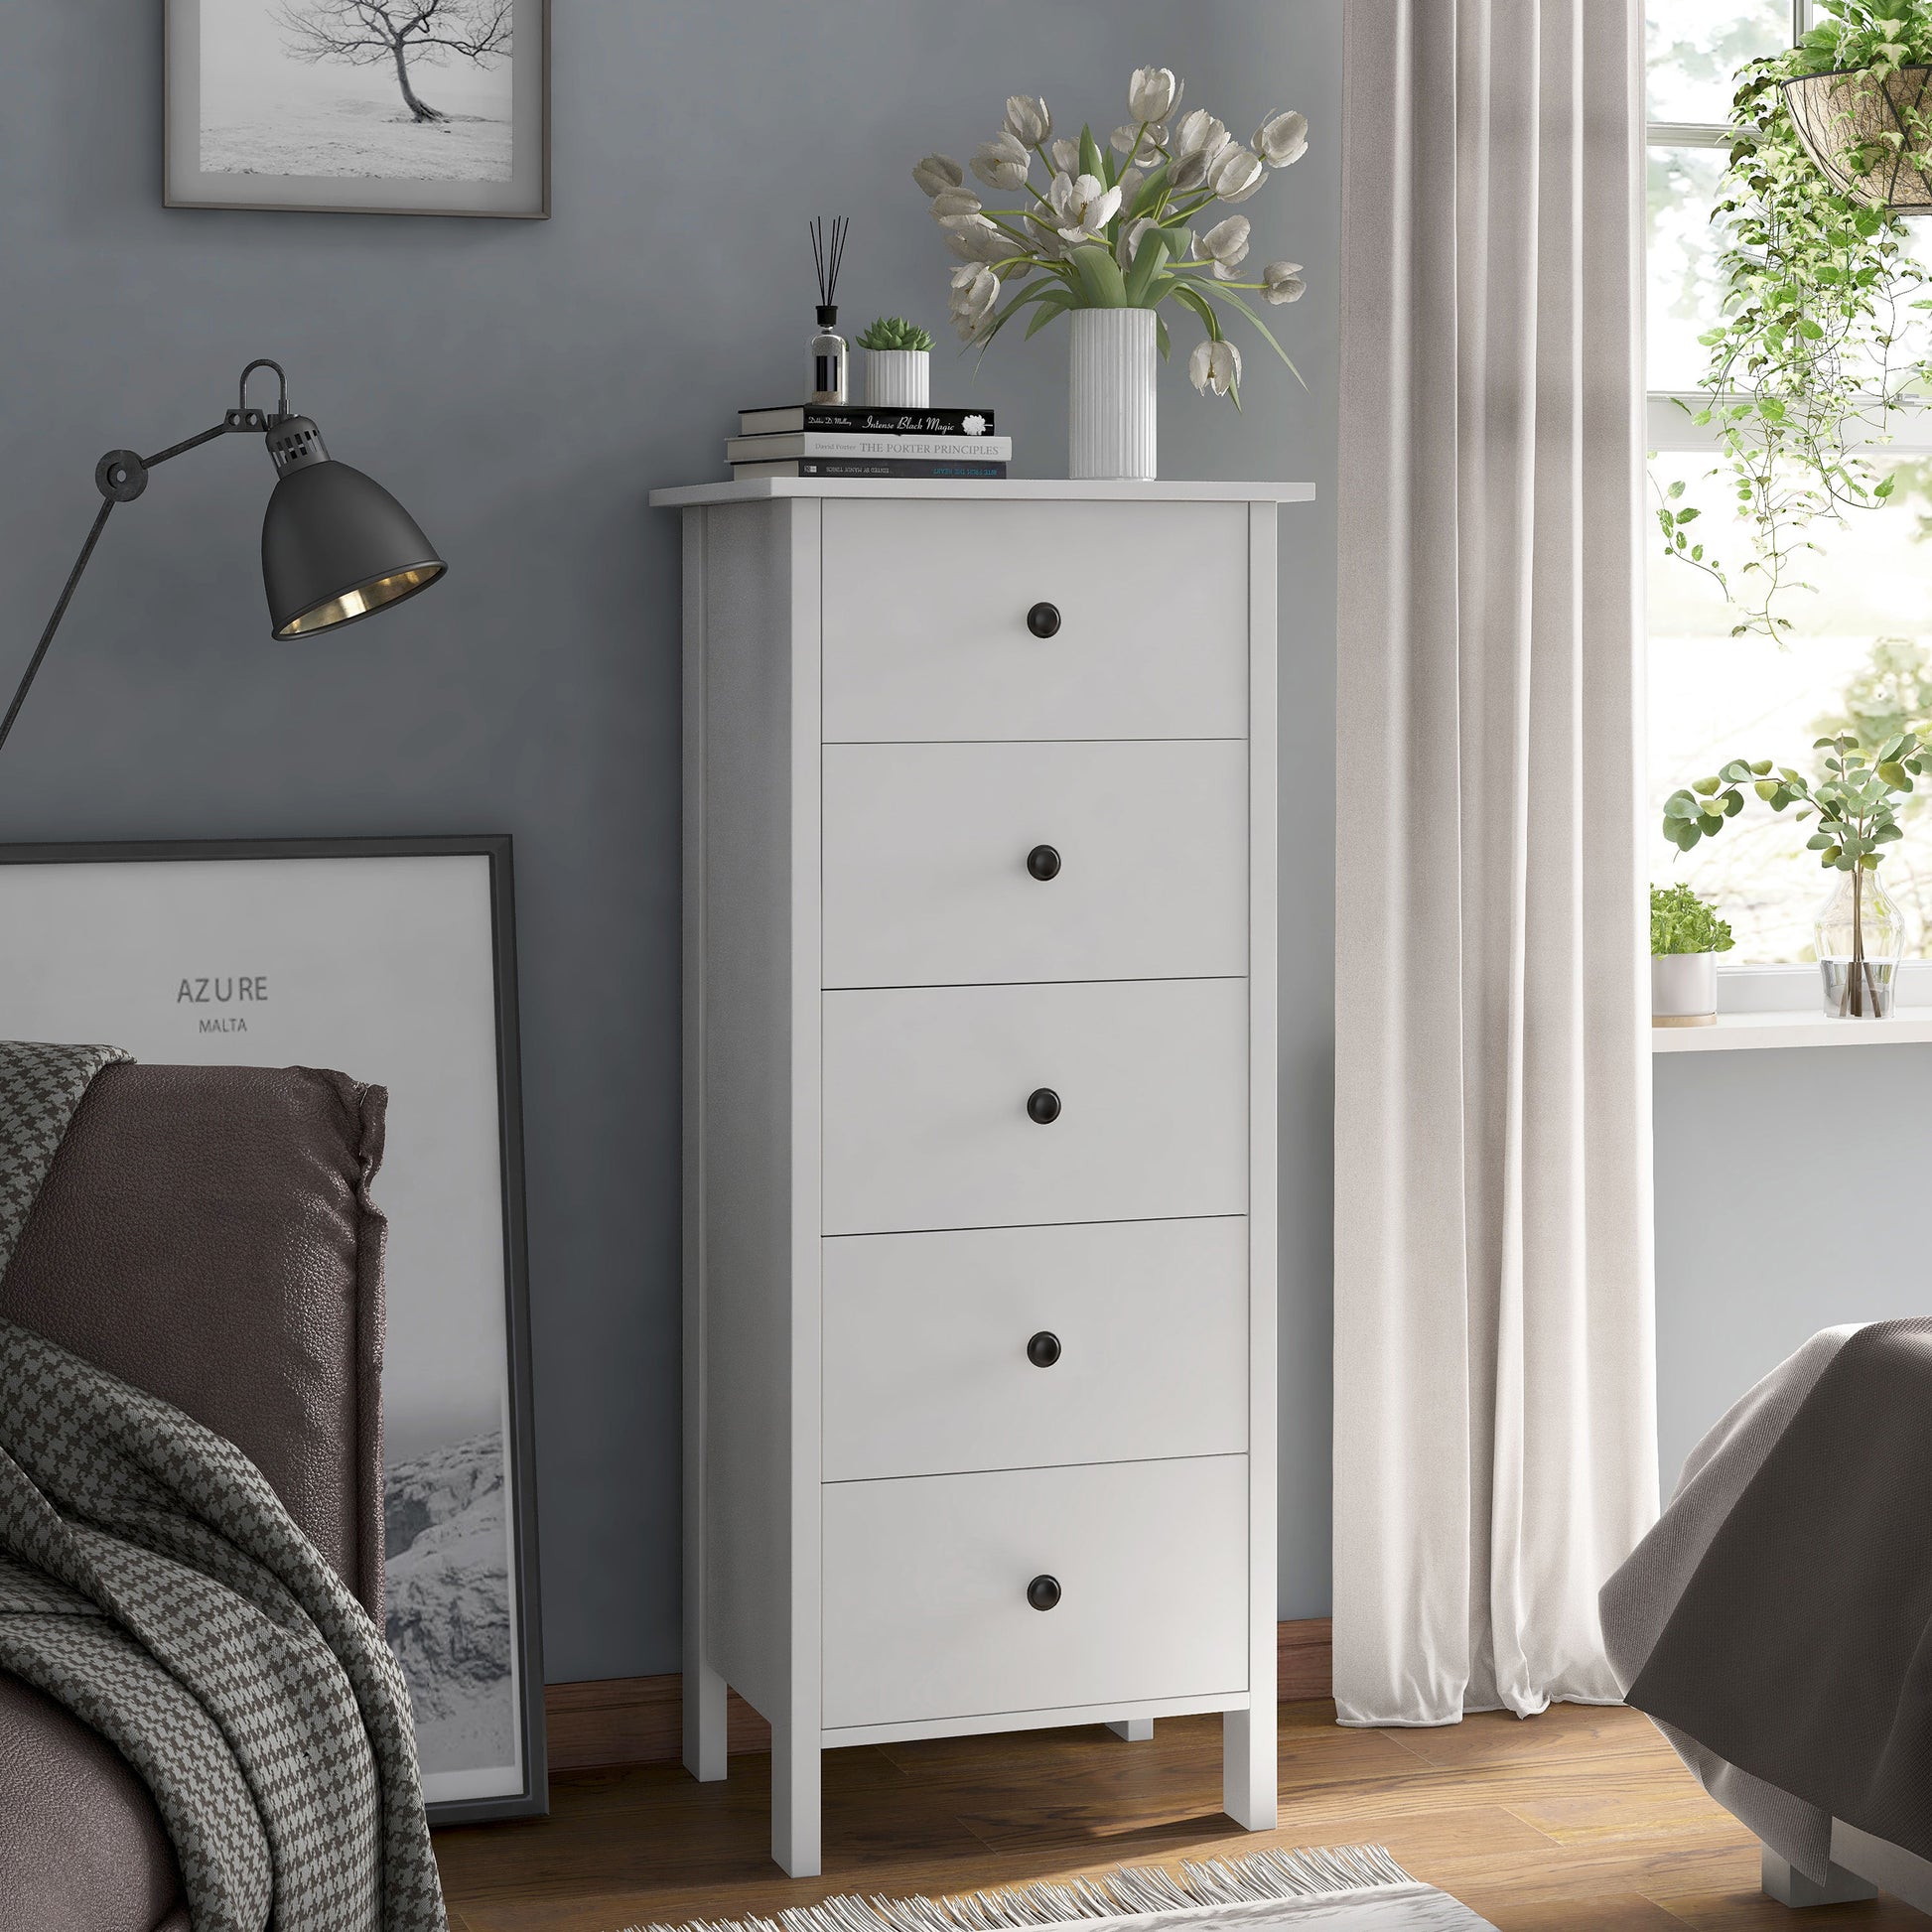 Right angled transitional white slim five-drawer chest in a bedroom with accessories